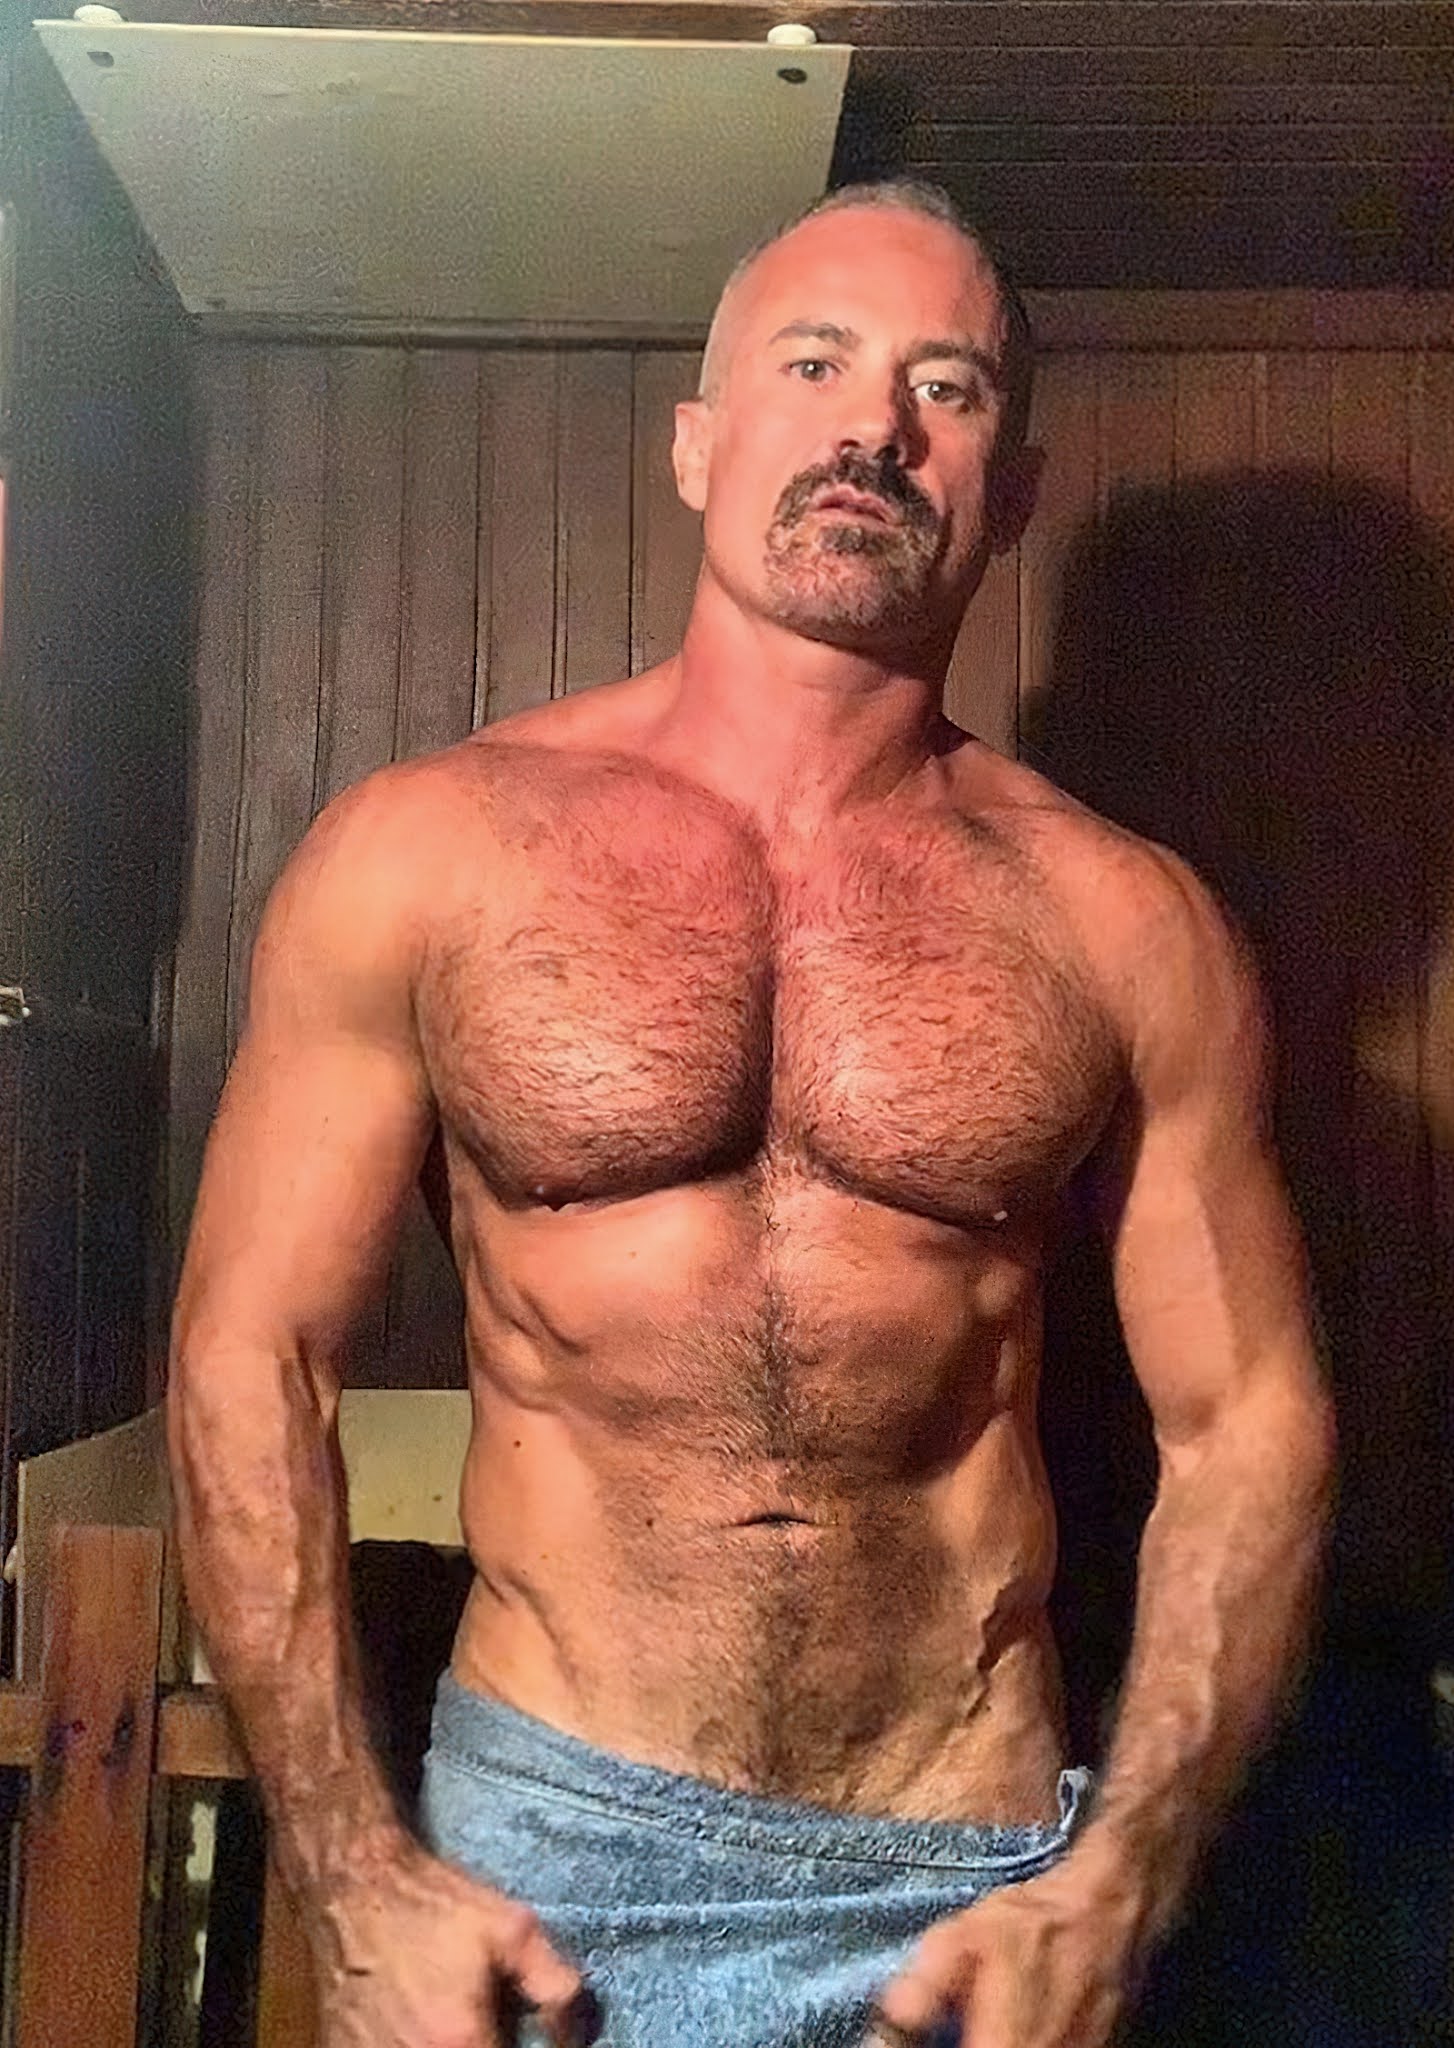 Superb Photos Set of Hairy Chested Hunks - Hot Muscular Daddy Bears.